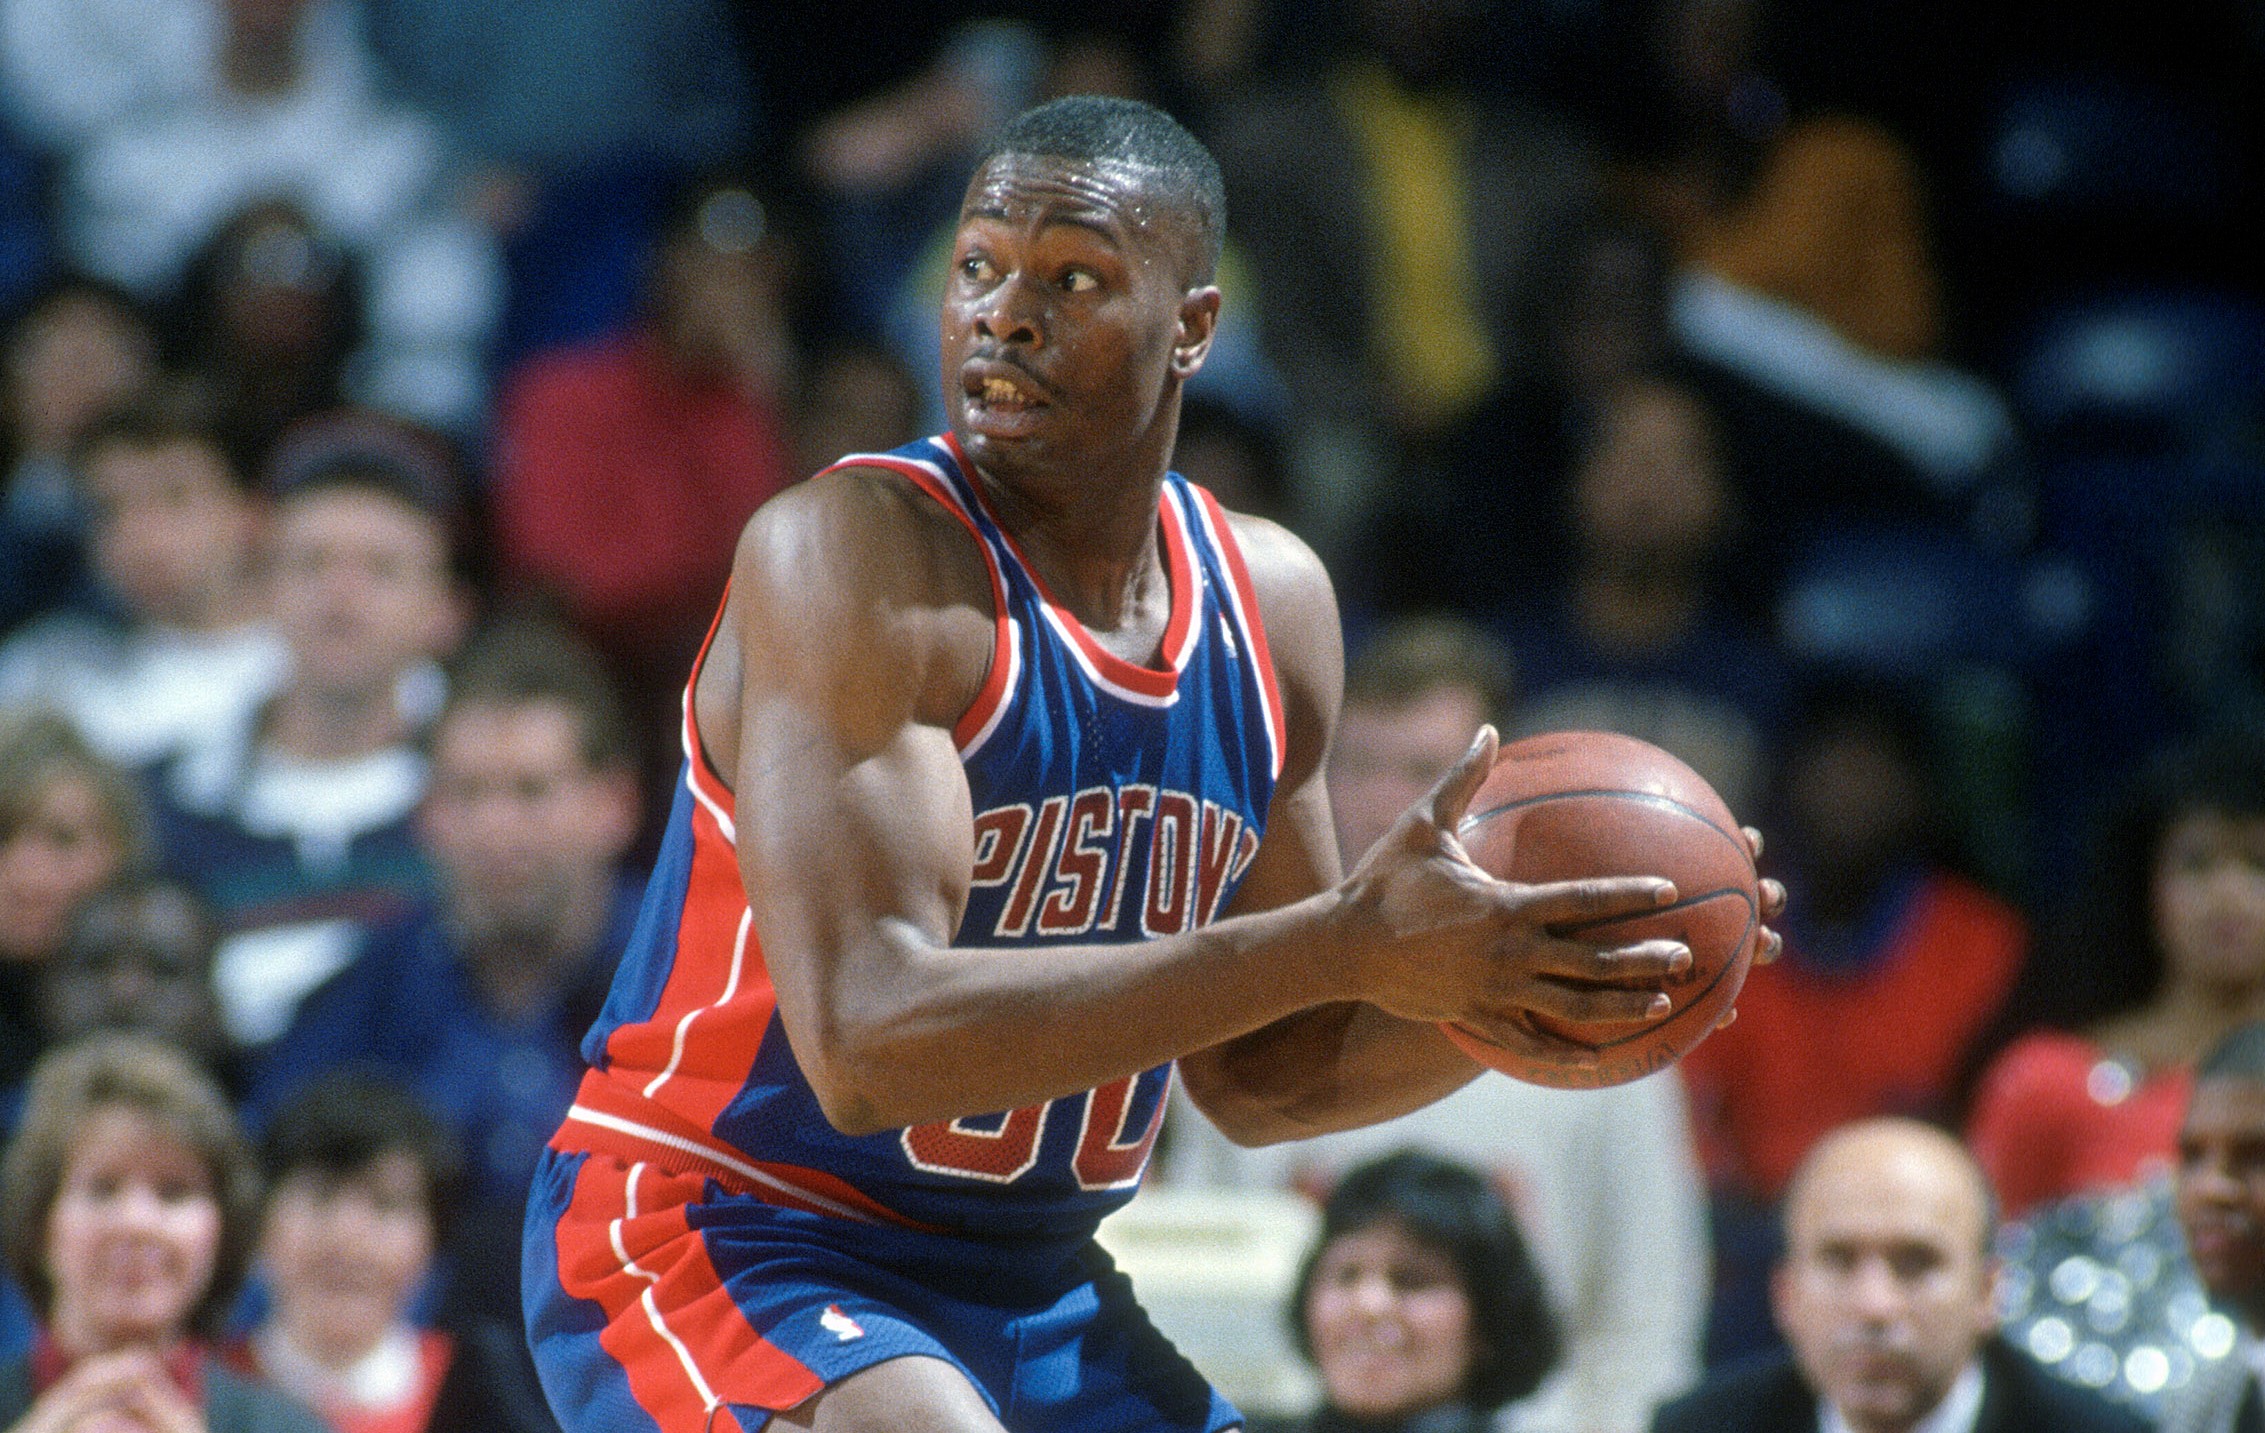 William Bedford of the Detroit Pistons in action against the Washington Bullets during an NBA basketball game circa 1991.